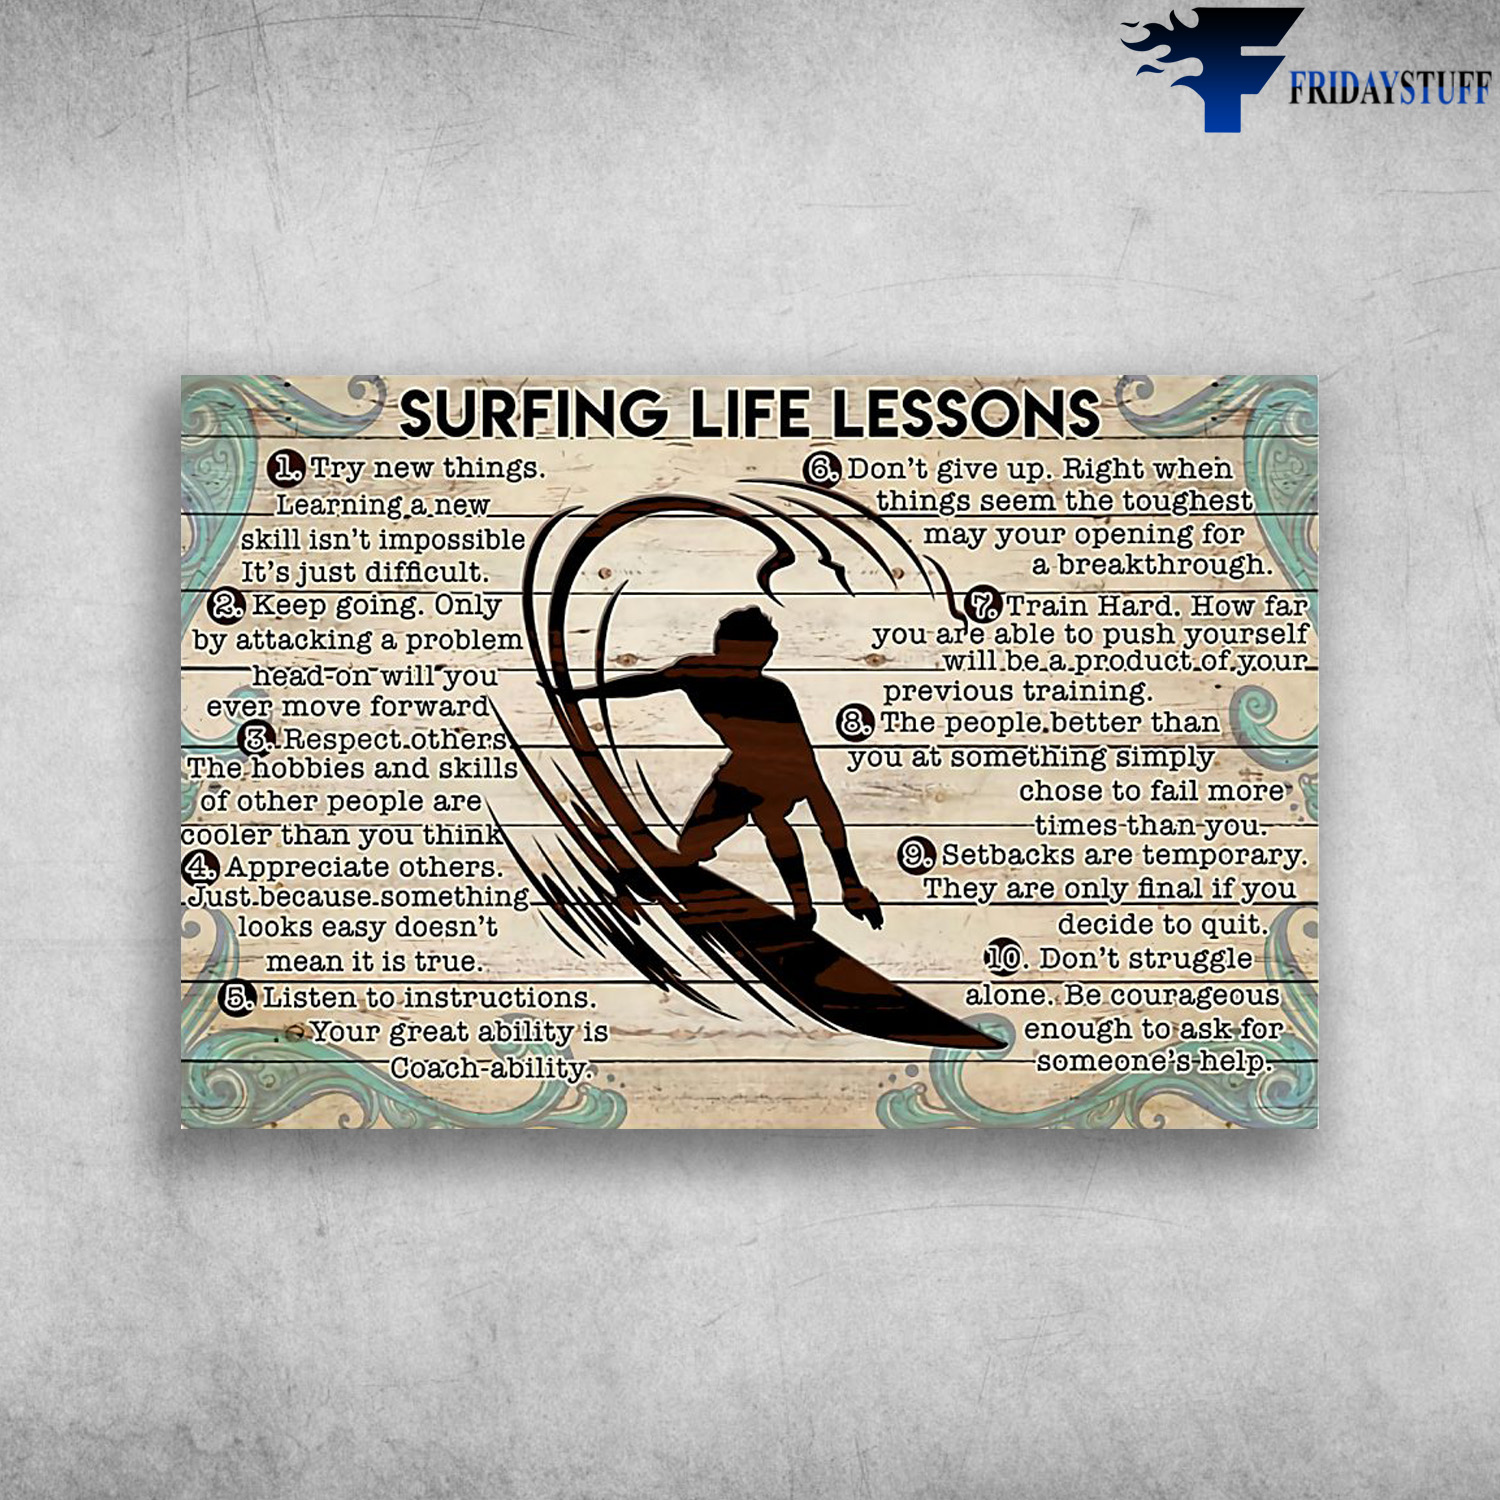 Surfing Life Lessons - Try New Things Learning A New Skill Isn't Impossible, It's Just Diffiicult, Keep Going, Only By Attacking A Problem Head On Will You Ever Move Forward, Don't Give Up